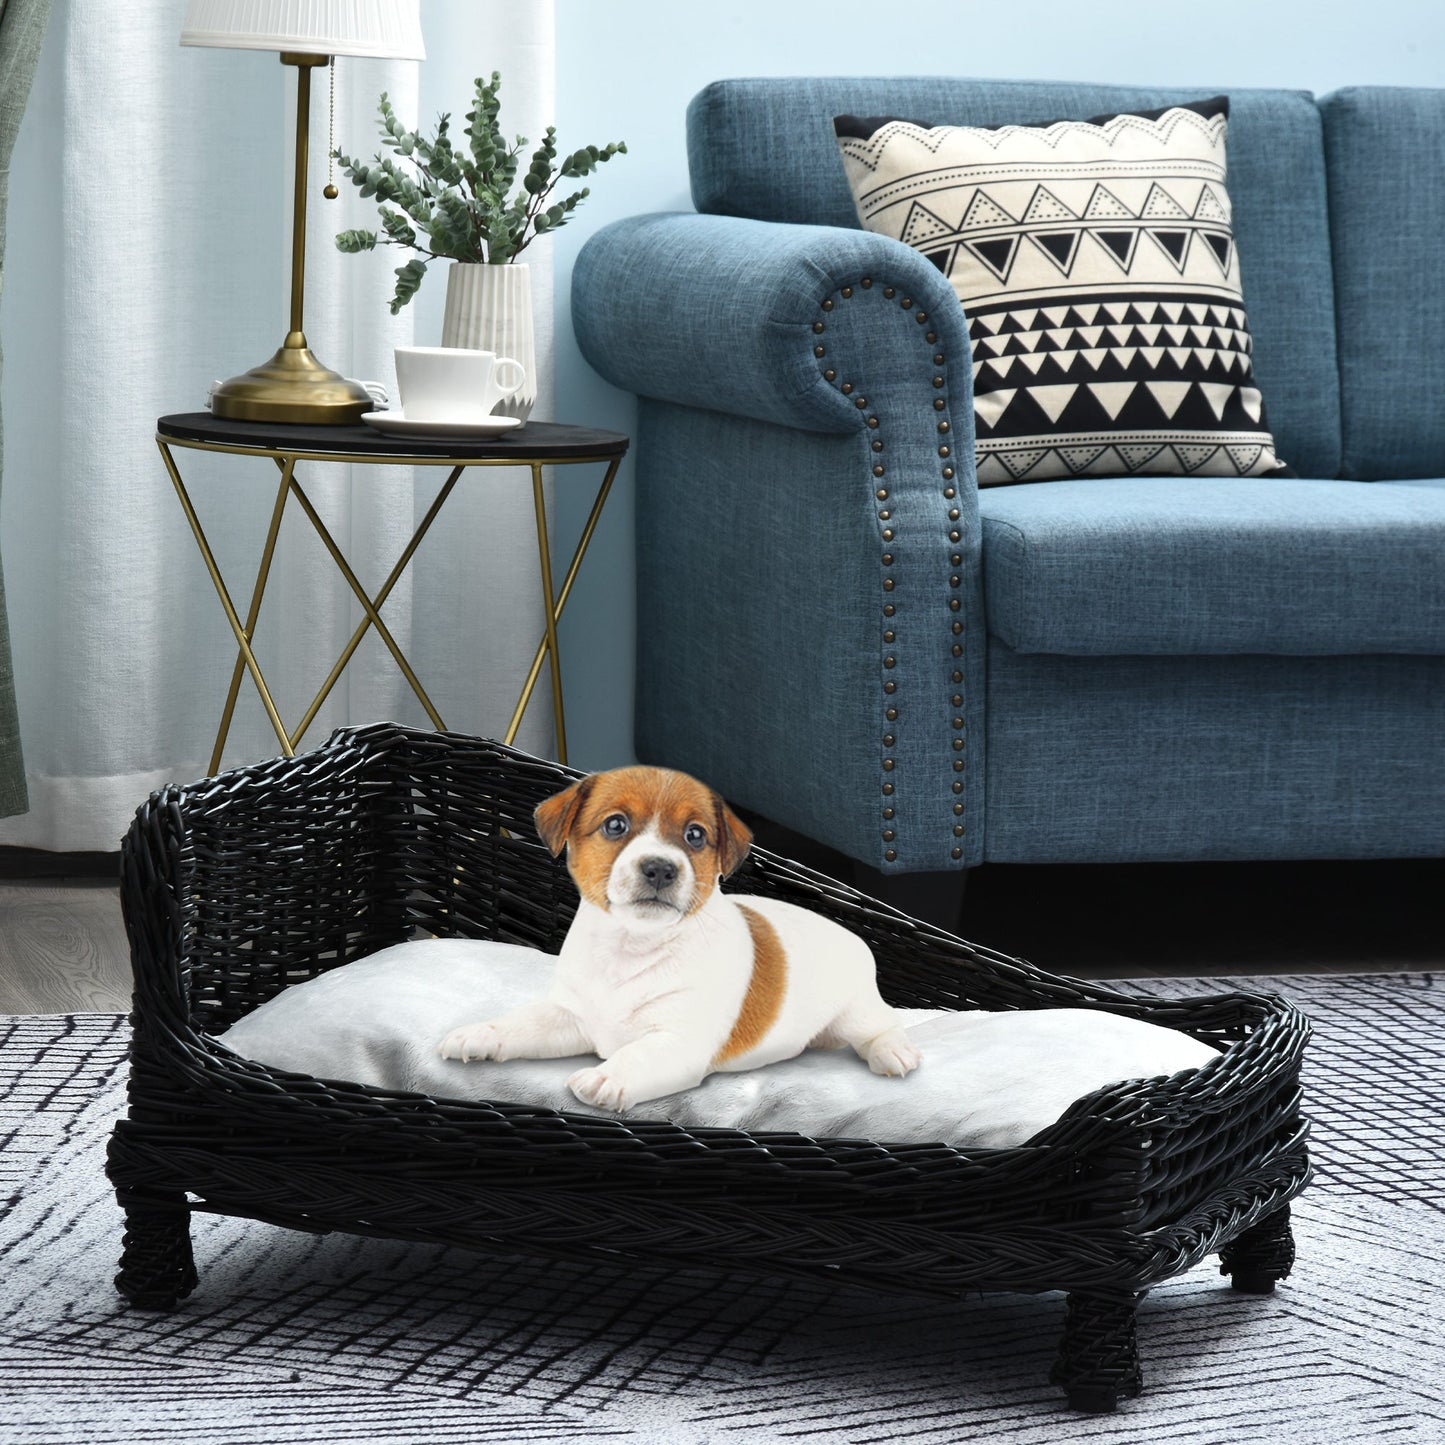 Pawhut cot for dogs pets chaise longue in wicker with black pillow